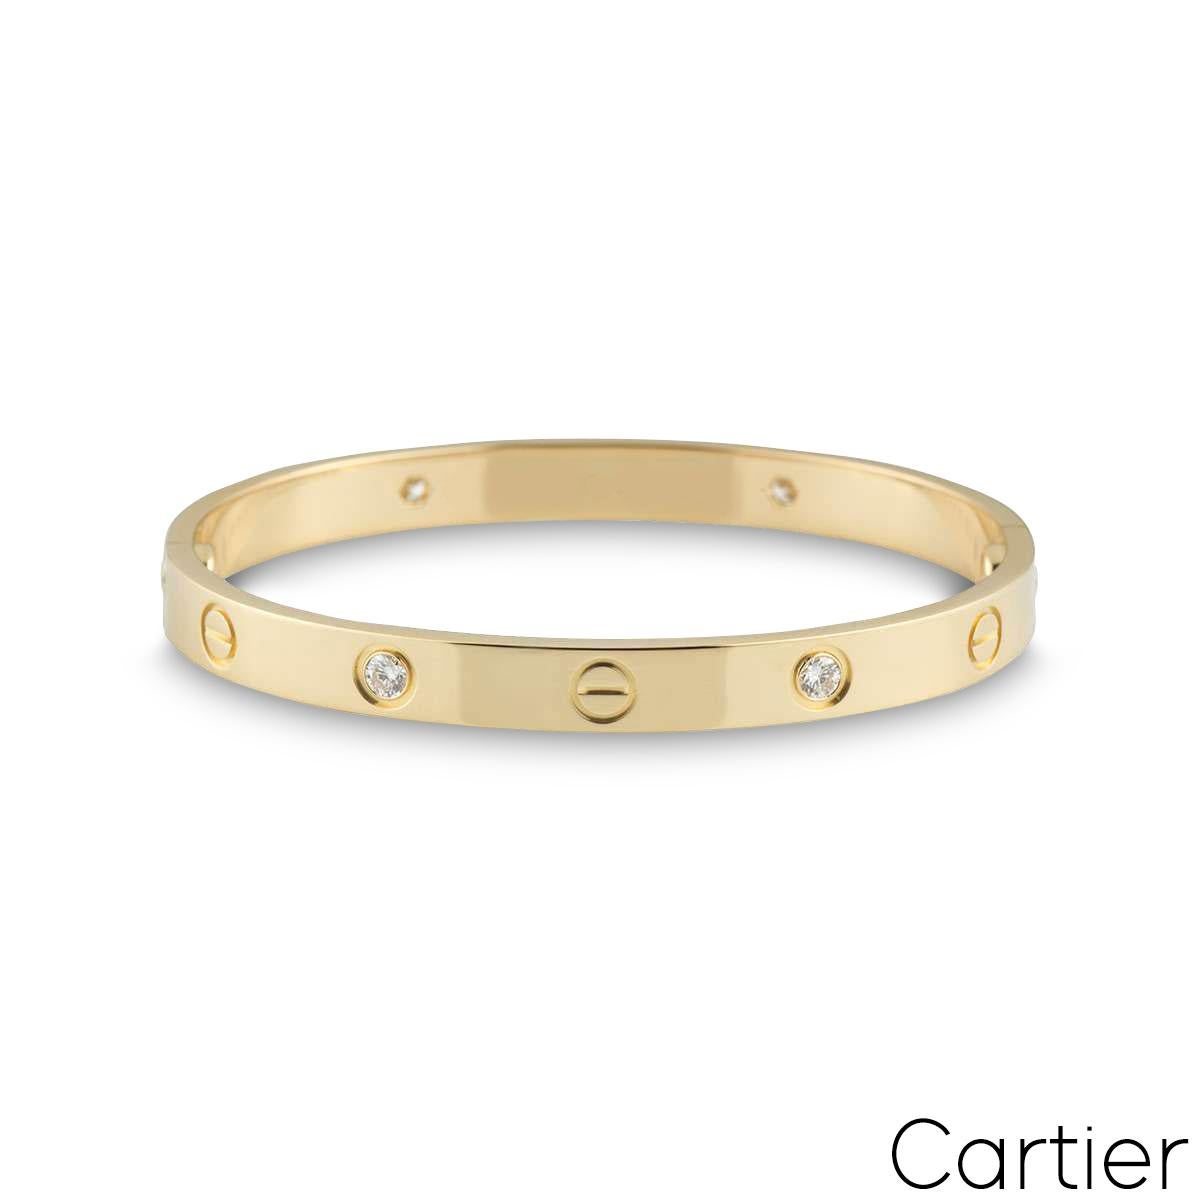 An 18k yellow gold Cartier half diamond bracelet from the Love collection. The bracelet comprises of screw motifs alternating with four round brilliant cut diamonds in a rubover setting on the outer edge of the bracelet with a weight of 0.42ct. The